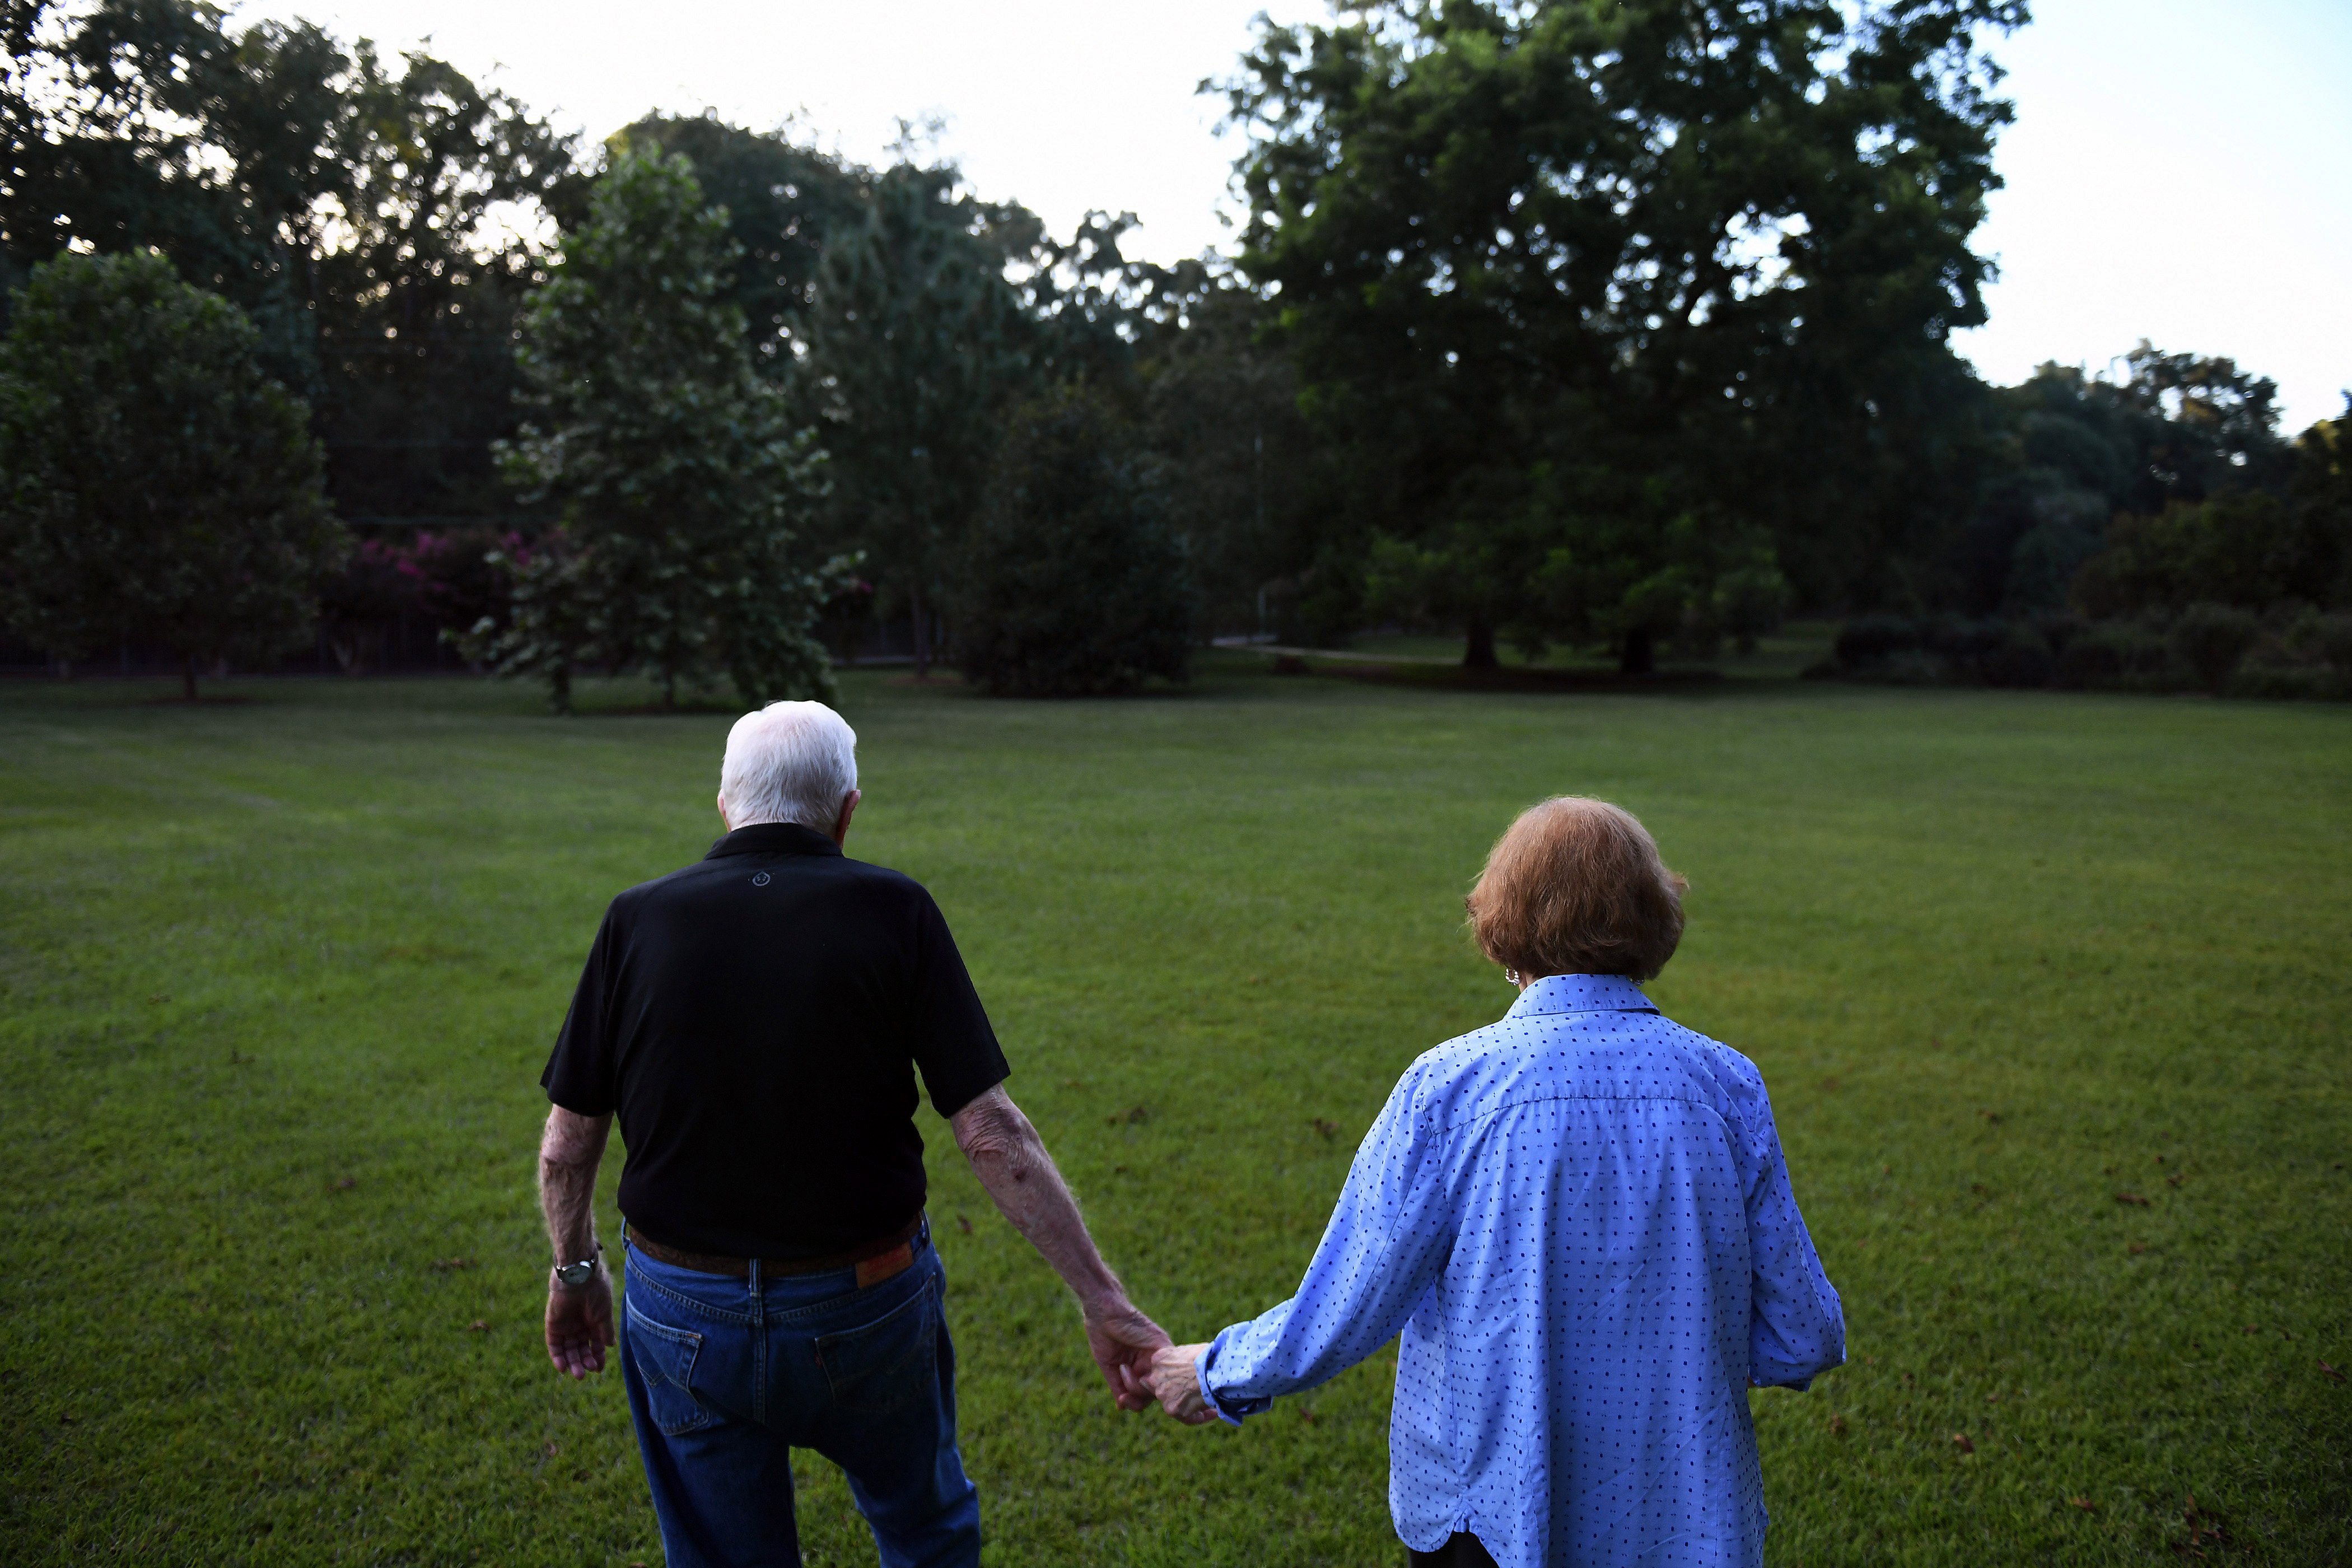 Jimmy Carter and Rosalynn Carter on Saturday, August 4, 2018 in Plains, Georgia.┃Source: Getty Images